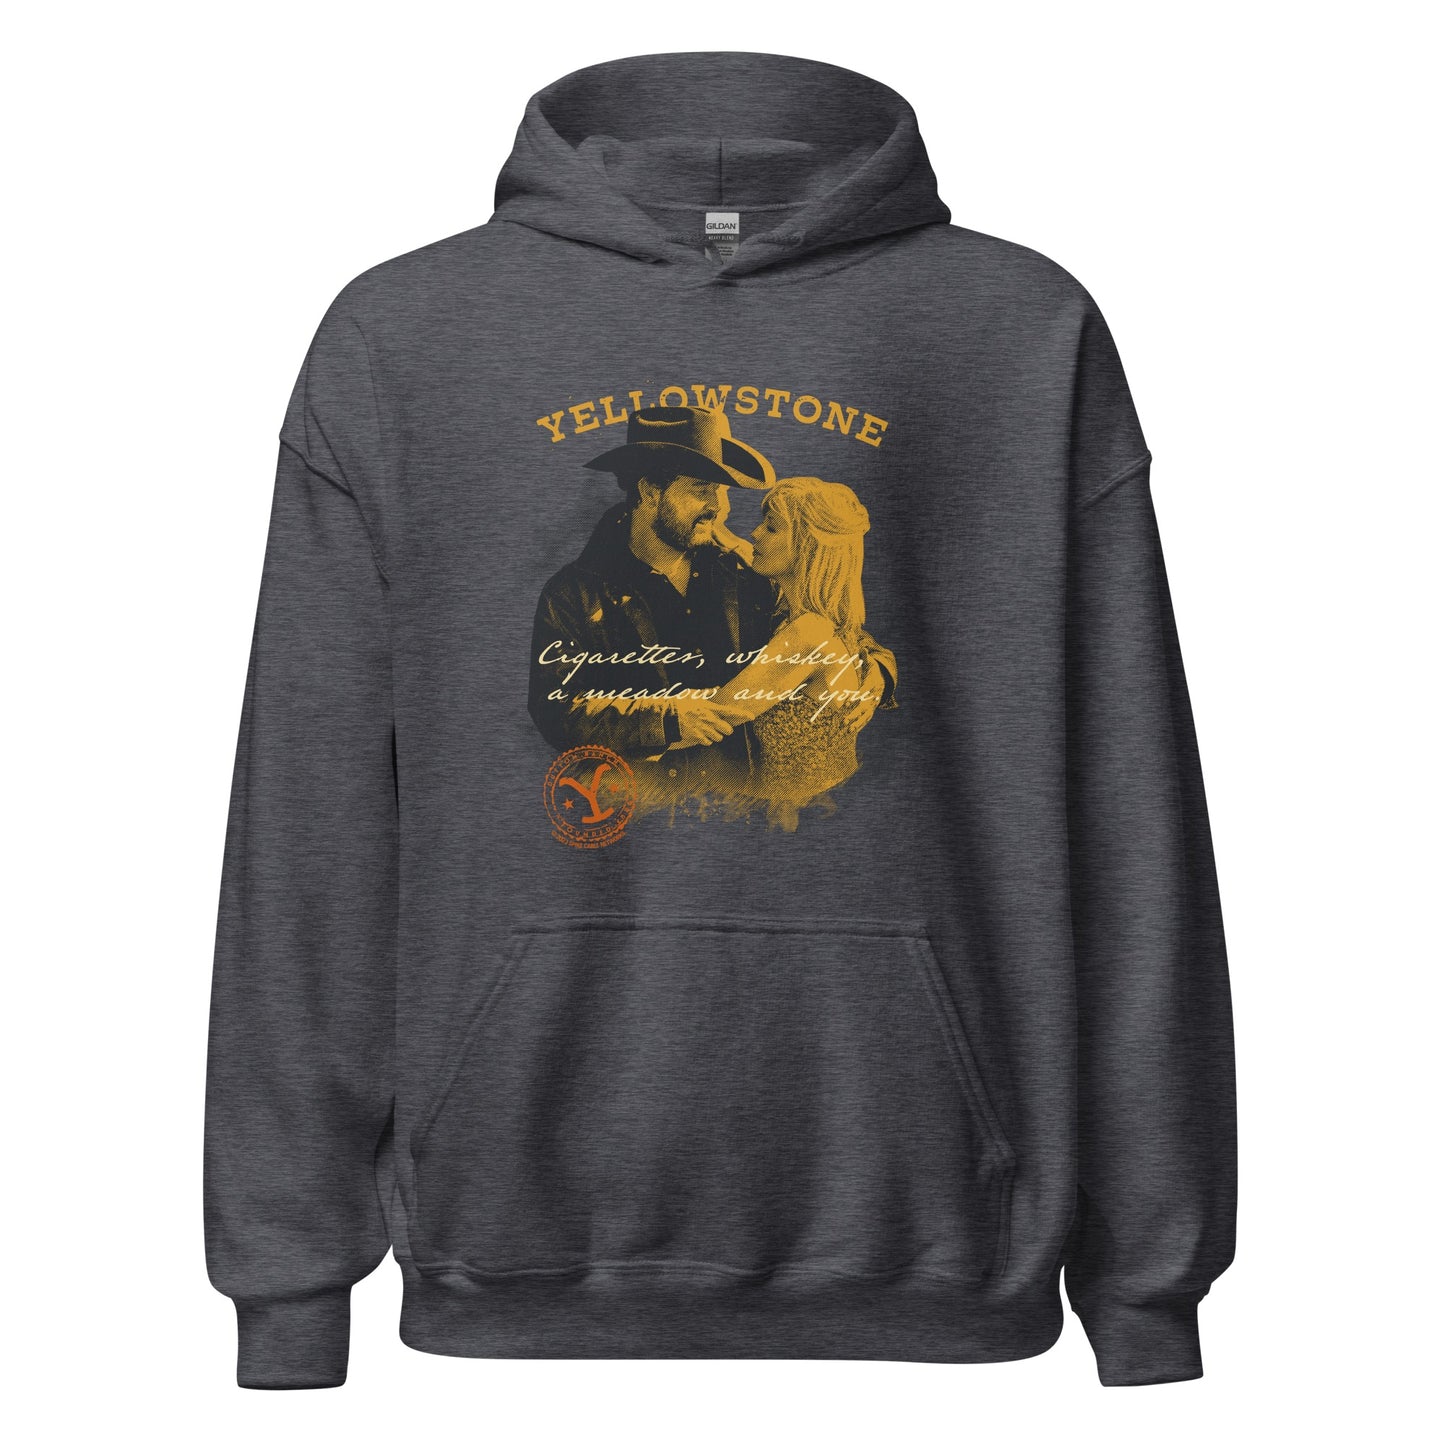 Yellowstone Cigarettes Whiskey and You Hooded Sweatshirt